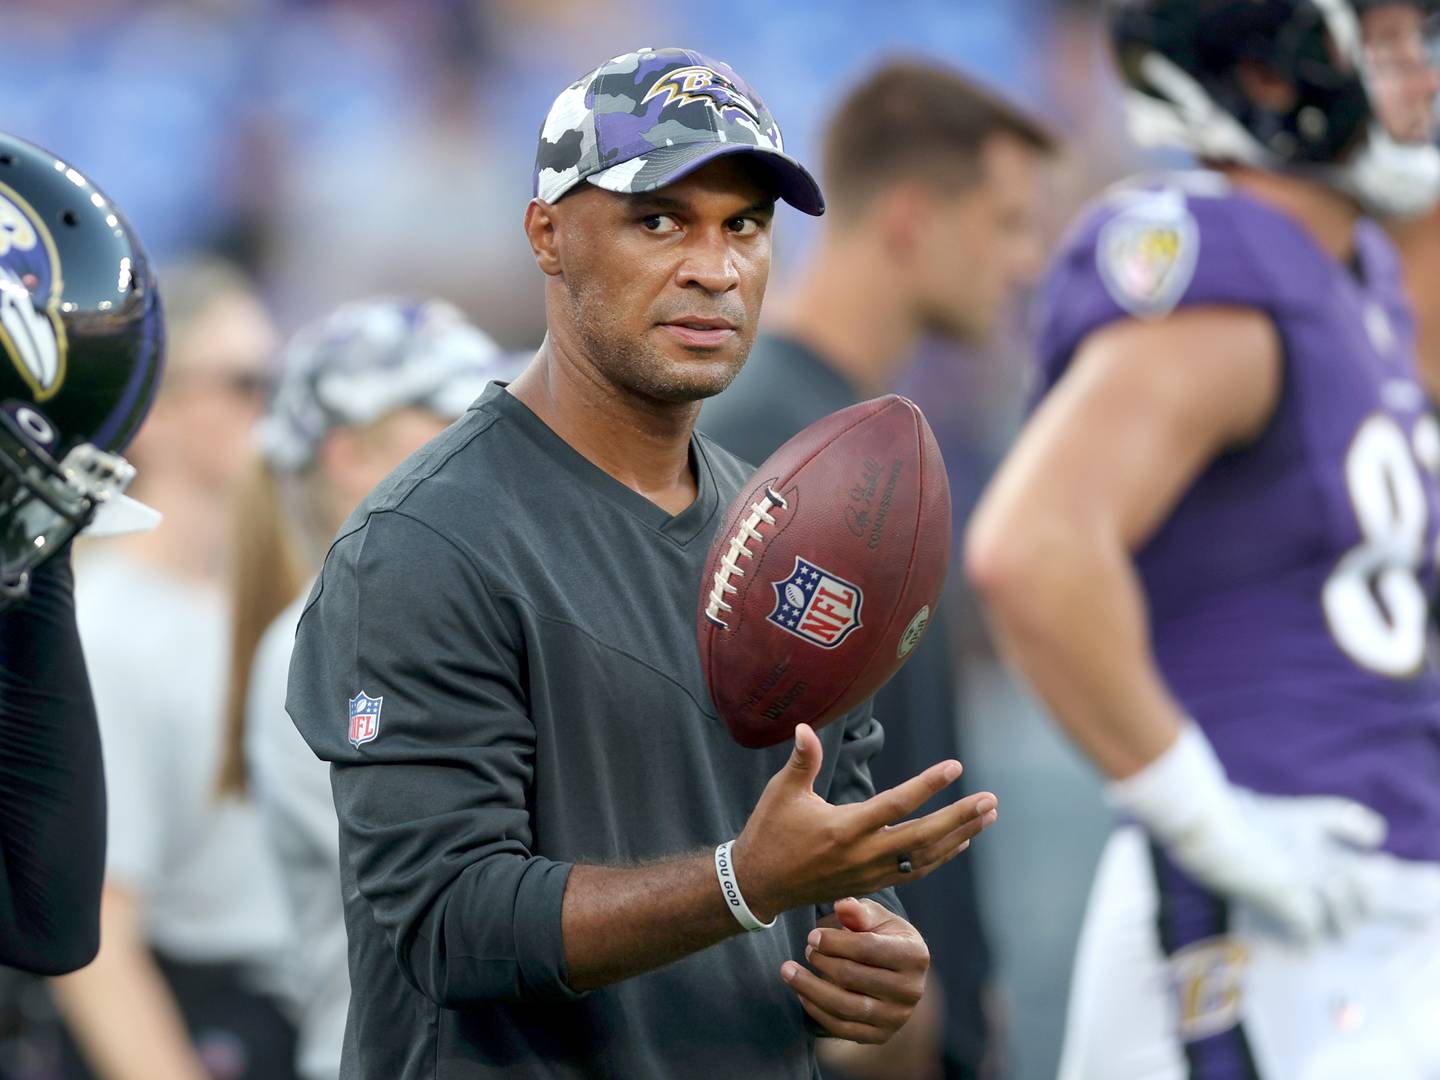 BALTIMORE, MARYLAND - AUGUST 11: Baltimore Ravens defensive backs coach D'Anton Lynn during warmups prior to the start of the Ravens and Tennessee Titans preseason game at M&T Bank Stadium on August 11, 2022 in Baltimore, Maryland.